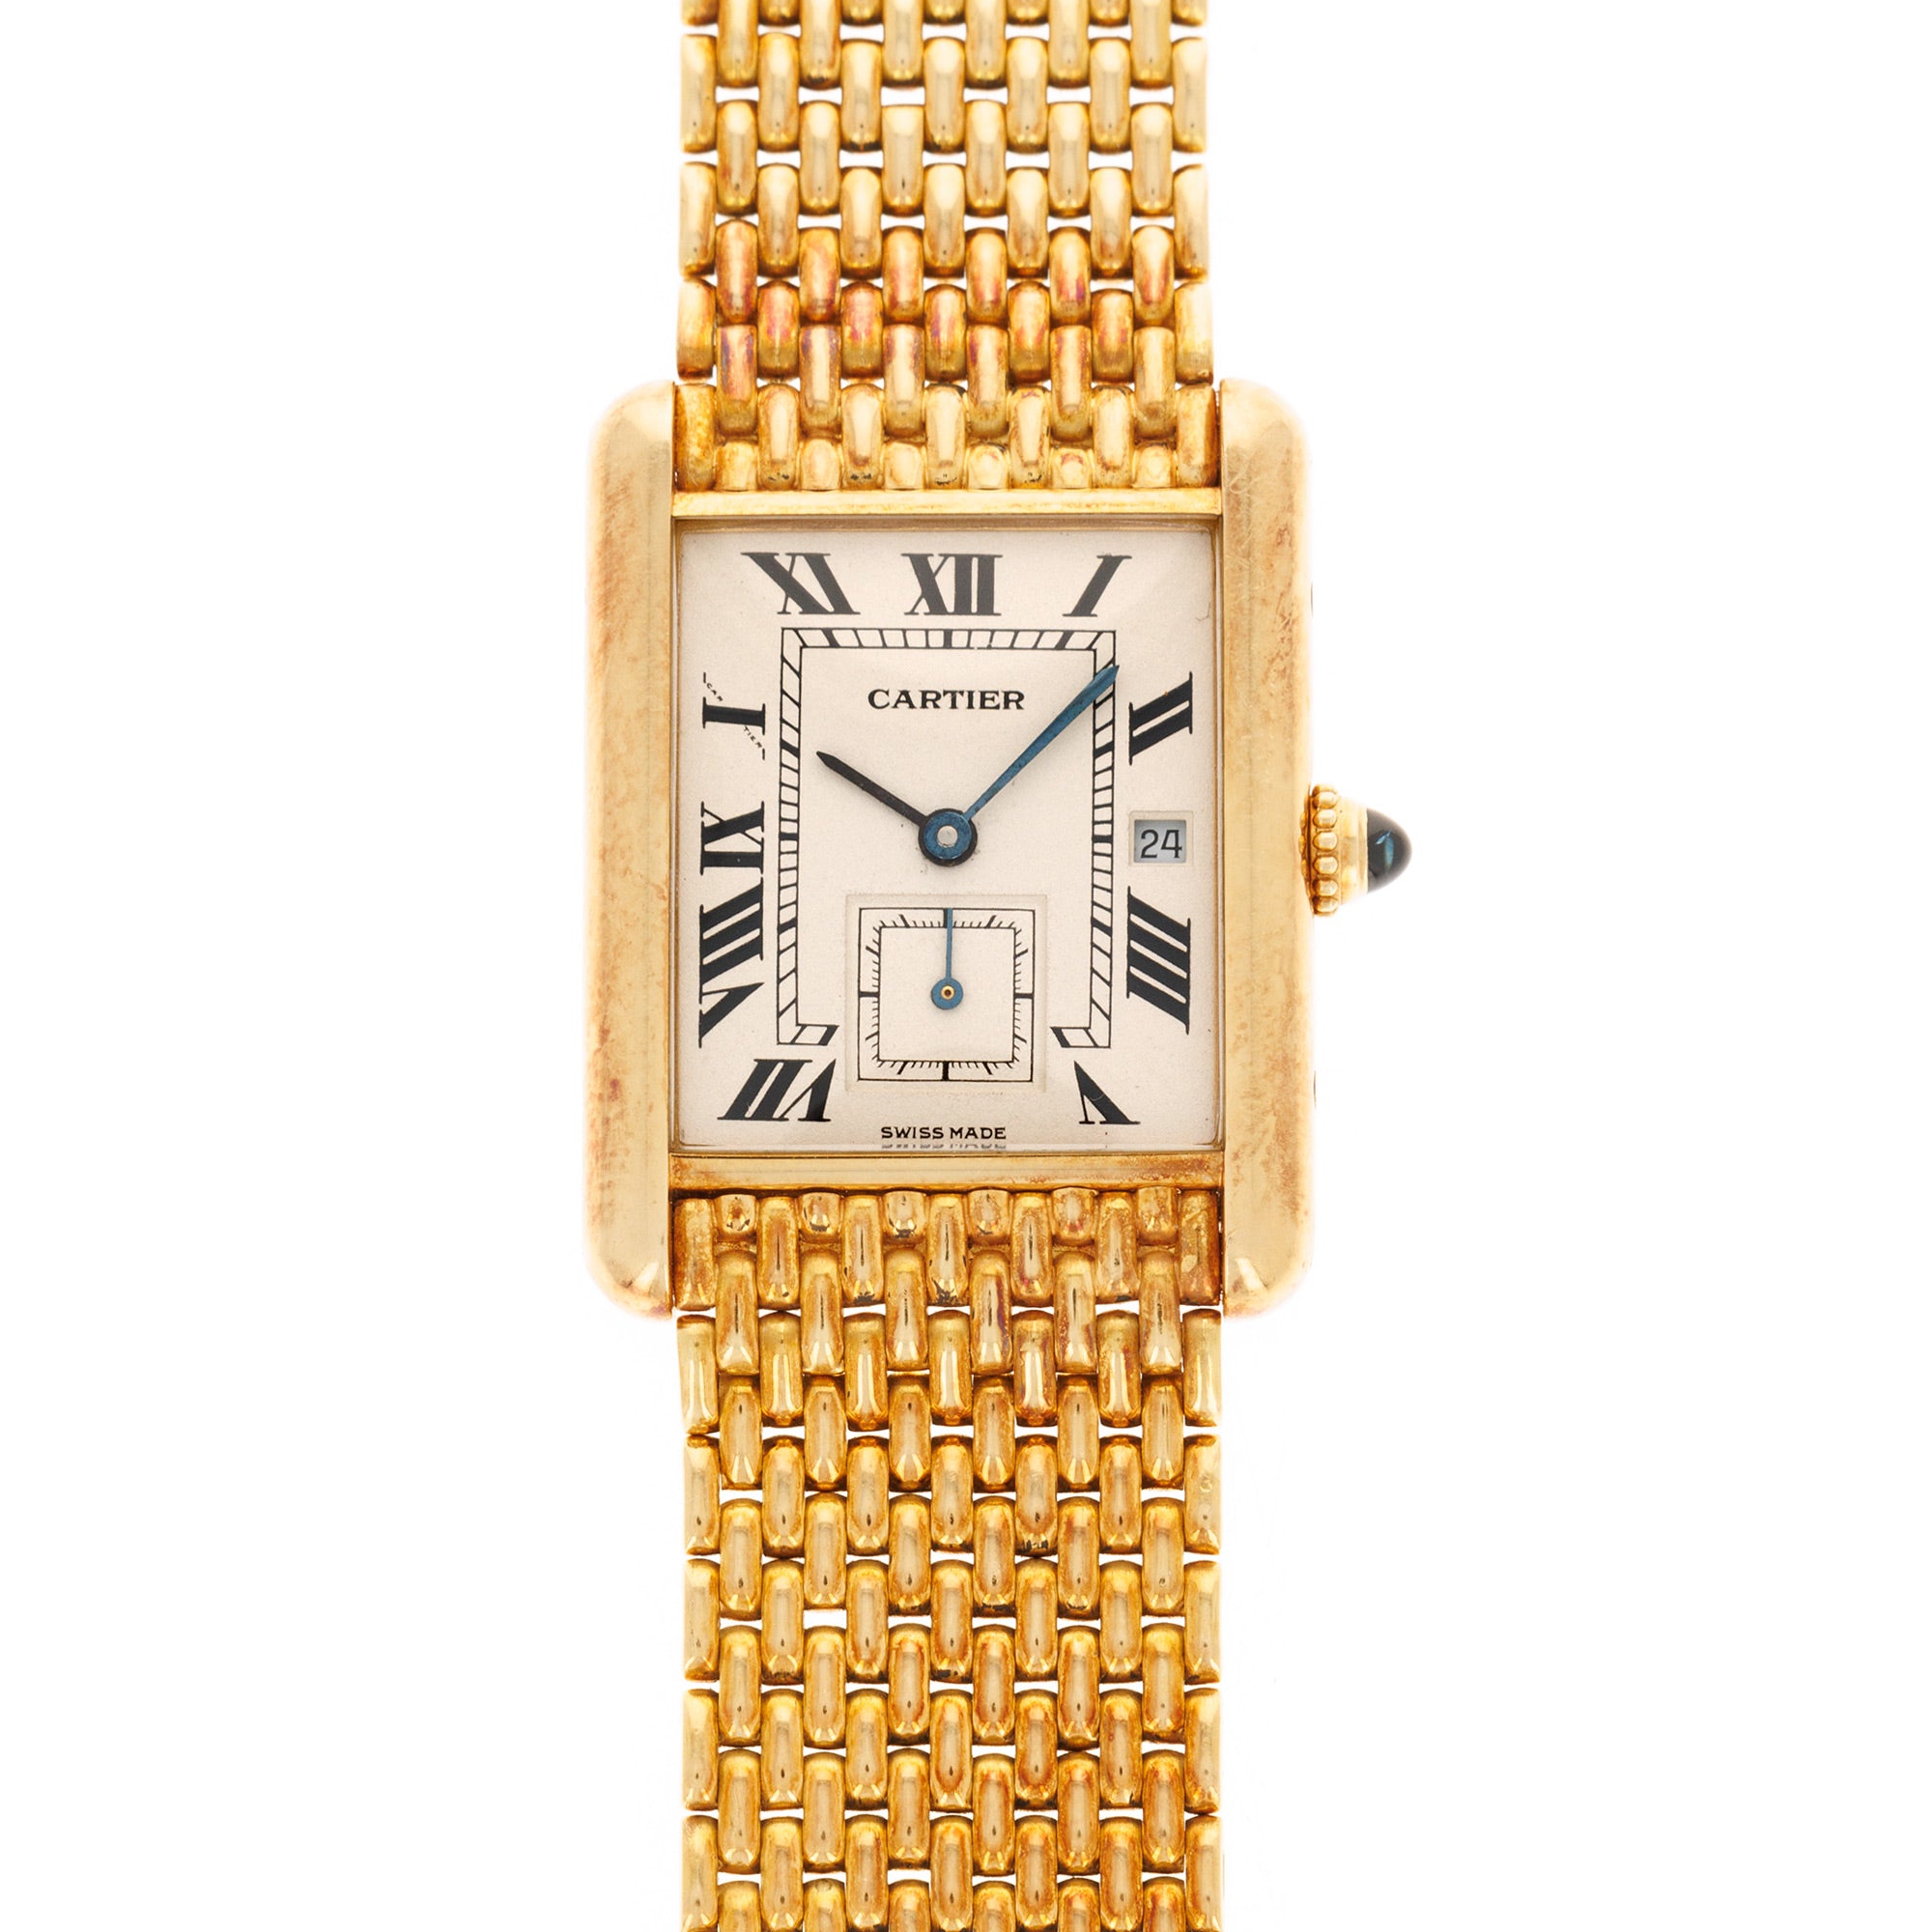 Solid gold Tank Louis Cartier - Rocks and Clocks